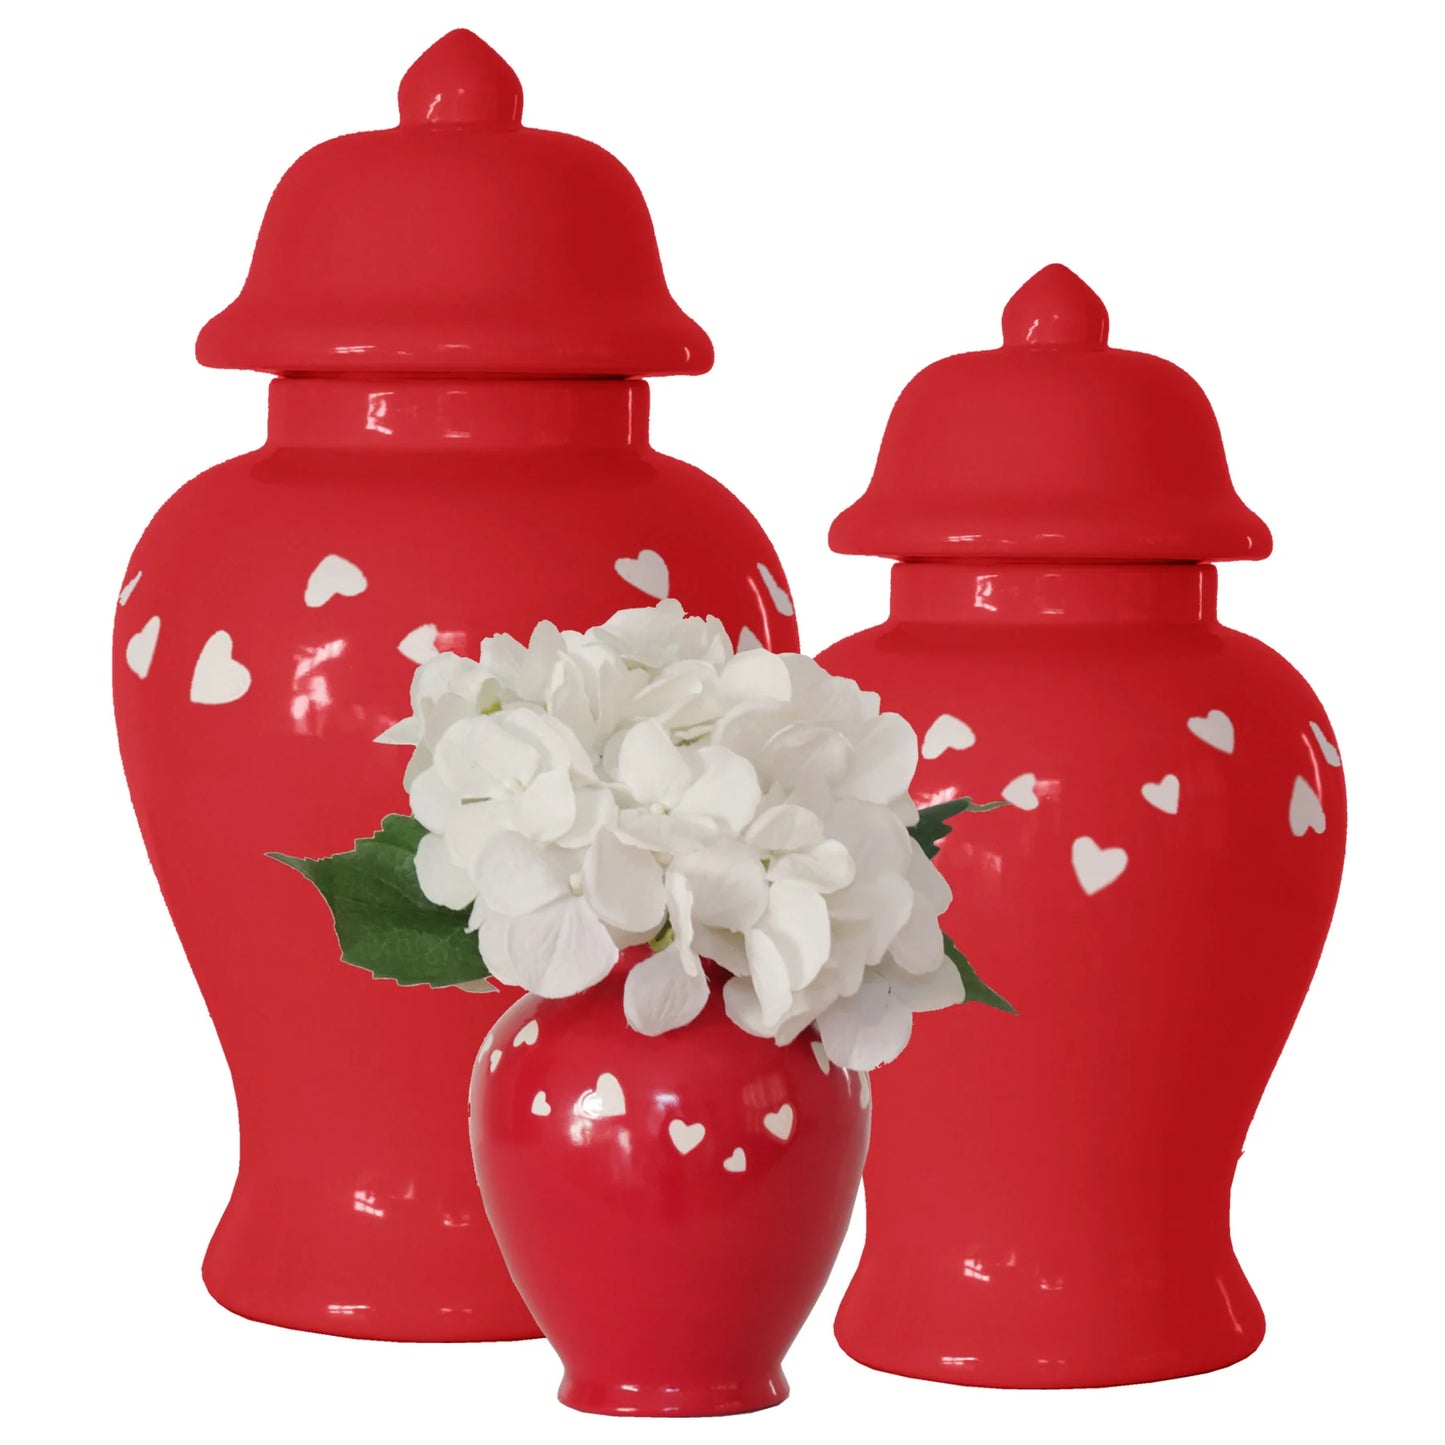 "Love is in the Air" Ginger Jars in Red